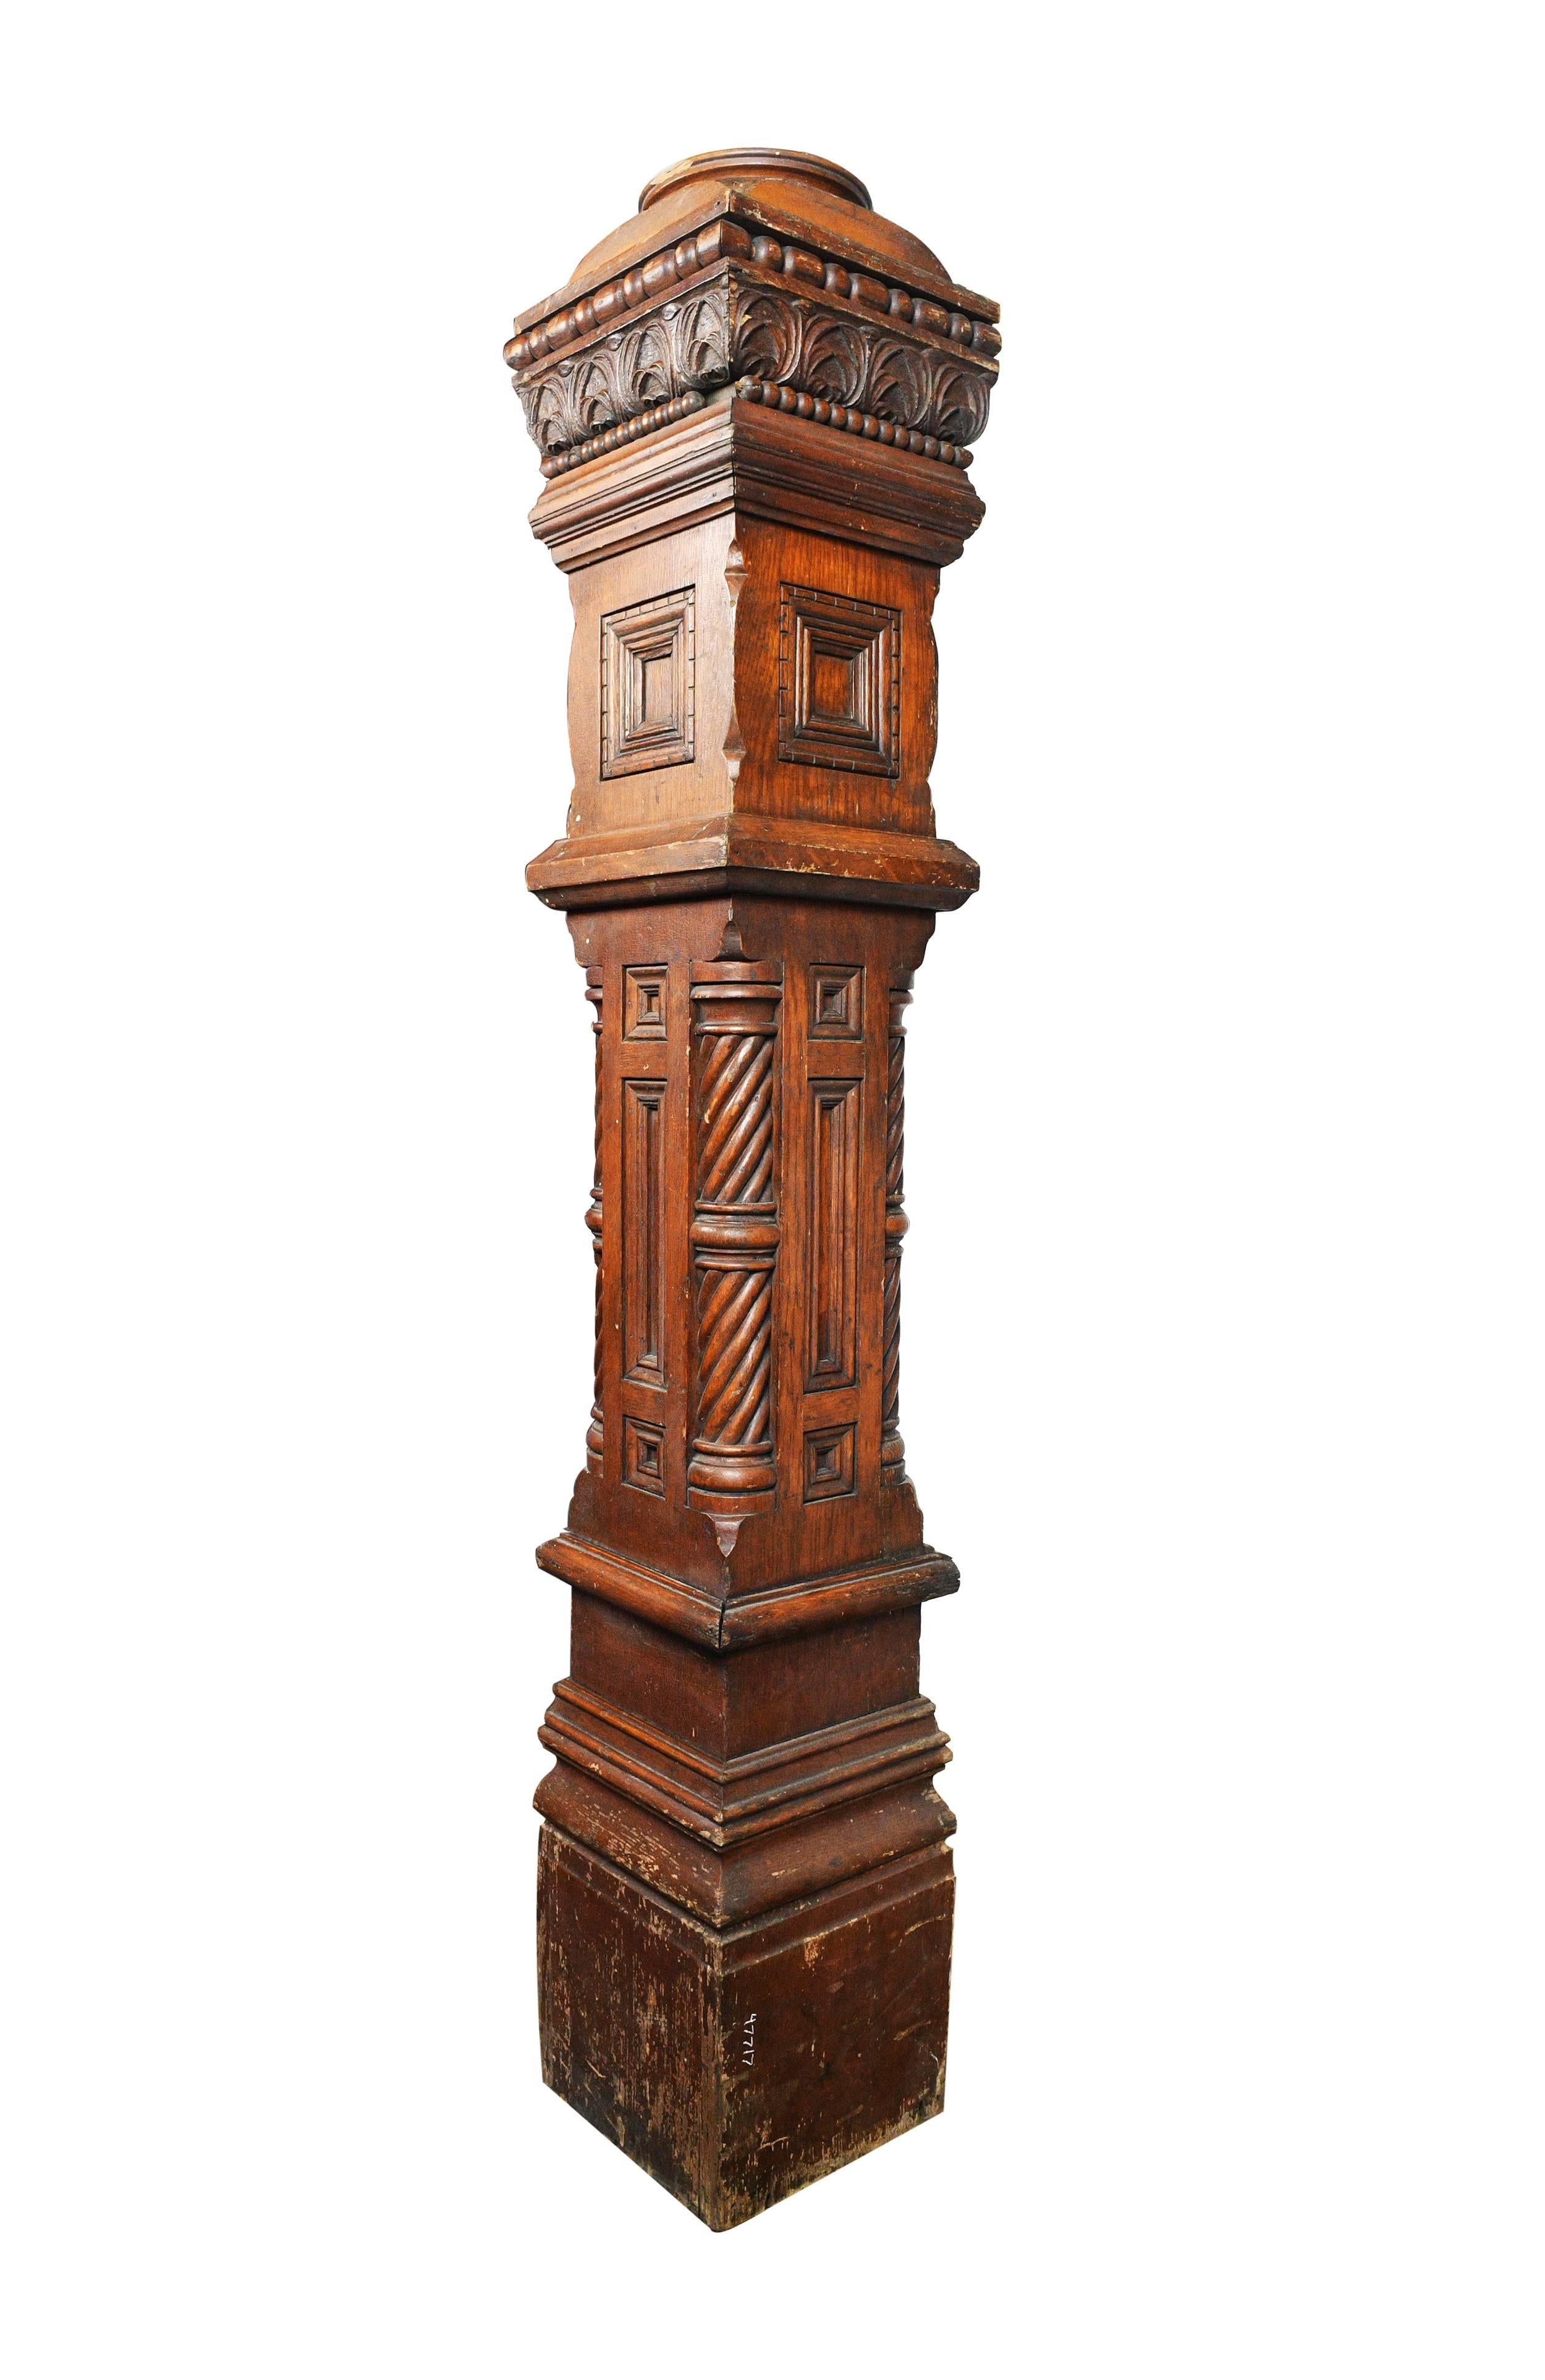 A beautiful Victorian style newel post. Like many Victorian style wood work pieces, it has a very decorative design. The post is hand-carved and the details are stunning. It includes floral elements and geometric shapes, which add both depth and